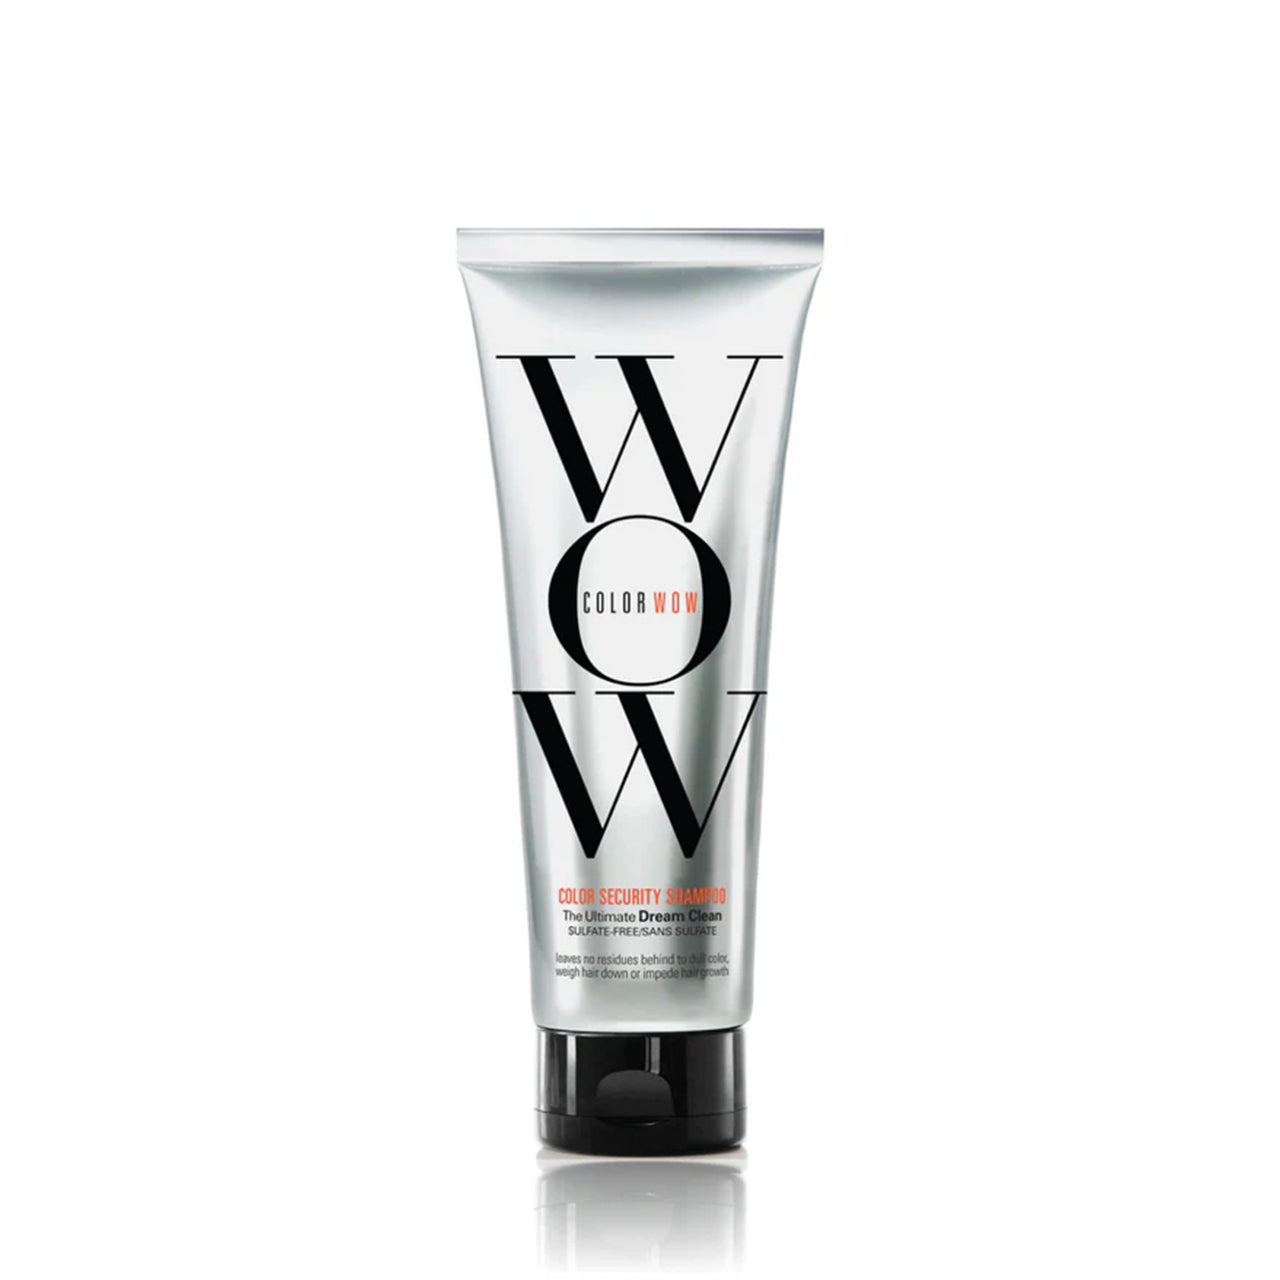 COLOR WOW COLOR SECURITY SULFATE FREE SHAMPOO 250ML